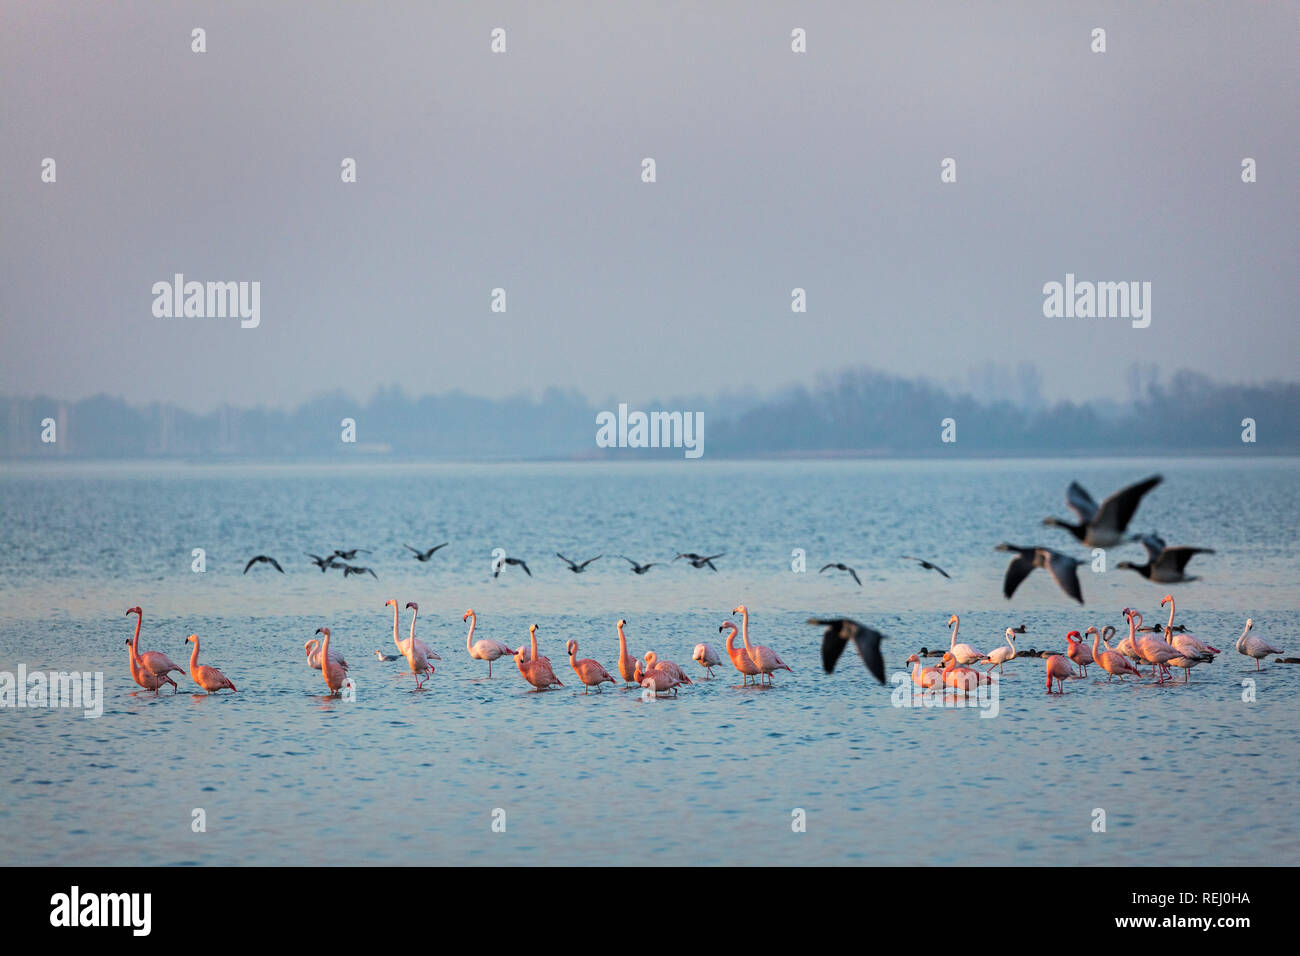 The Netherlands, Battenoord, hamlet on the island Goeree-Overflakkee, lake called Grevelingenmeer. Wintering place for flamingos. Barnacle geese. Stock Photo